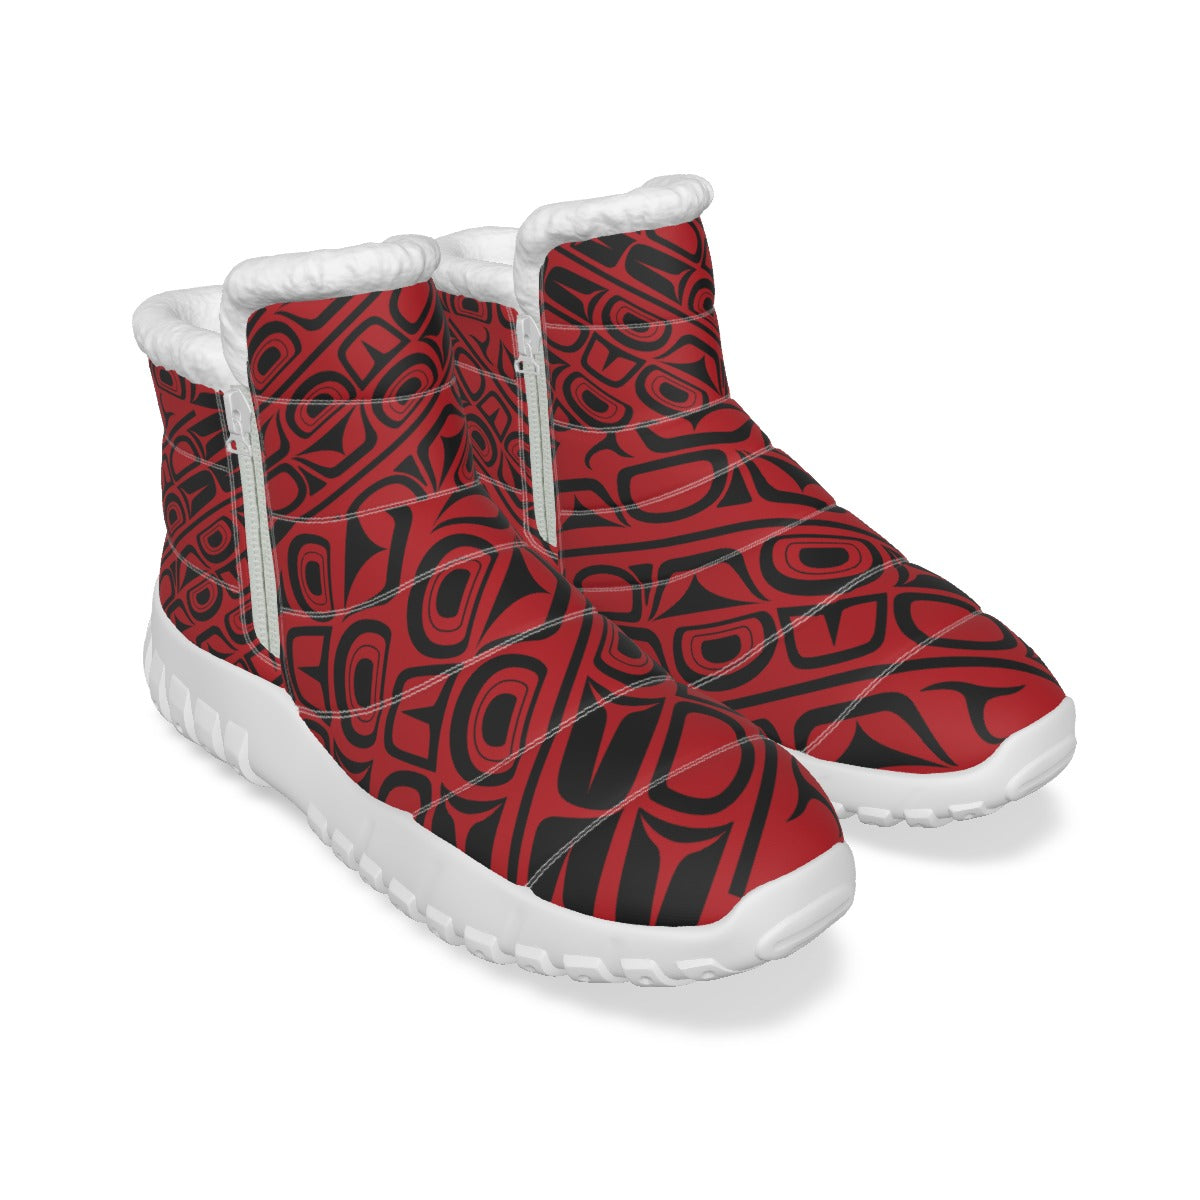 Form Red on Black Women's Zip-up Snow Boots